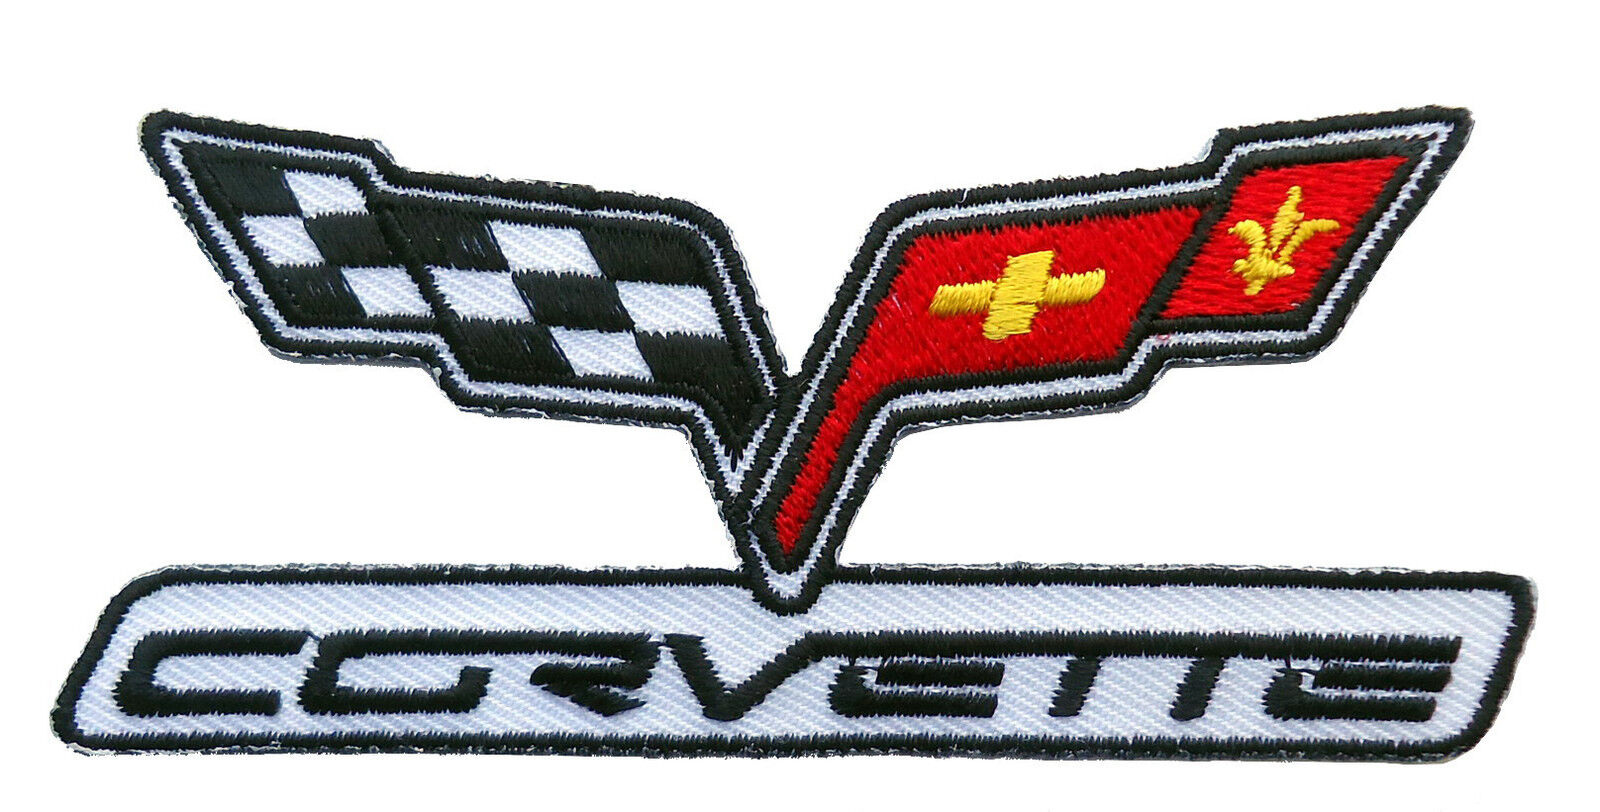 CORVETTE RACING  EMBROIDERED 4 INCH IRON ON SEW ON PATCH BY MILTACUSA